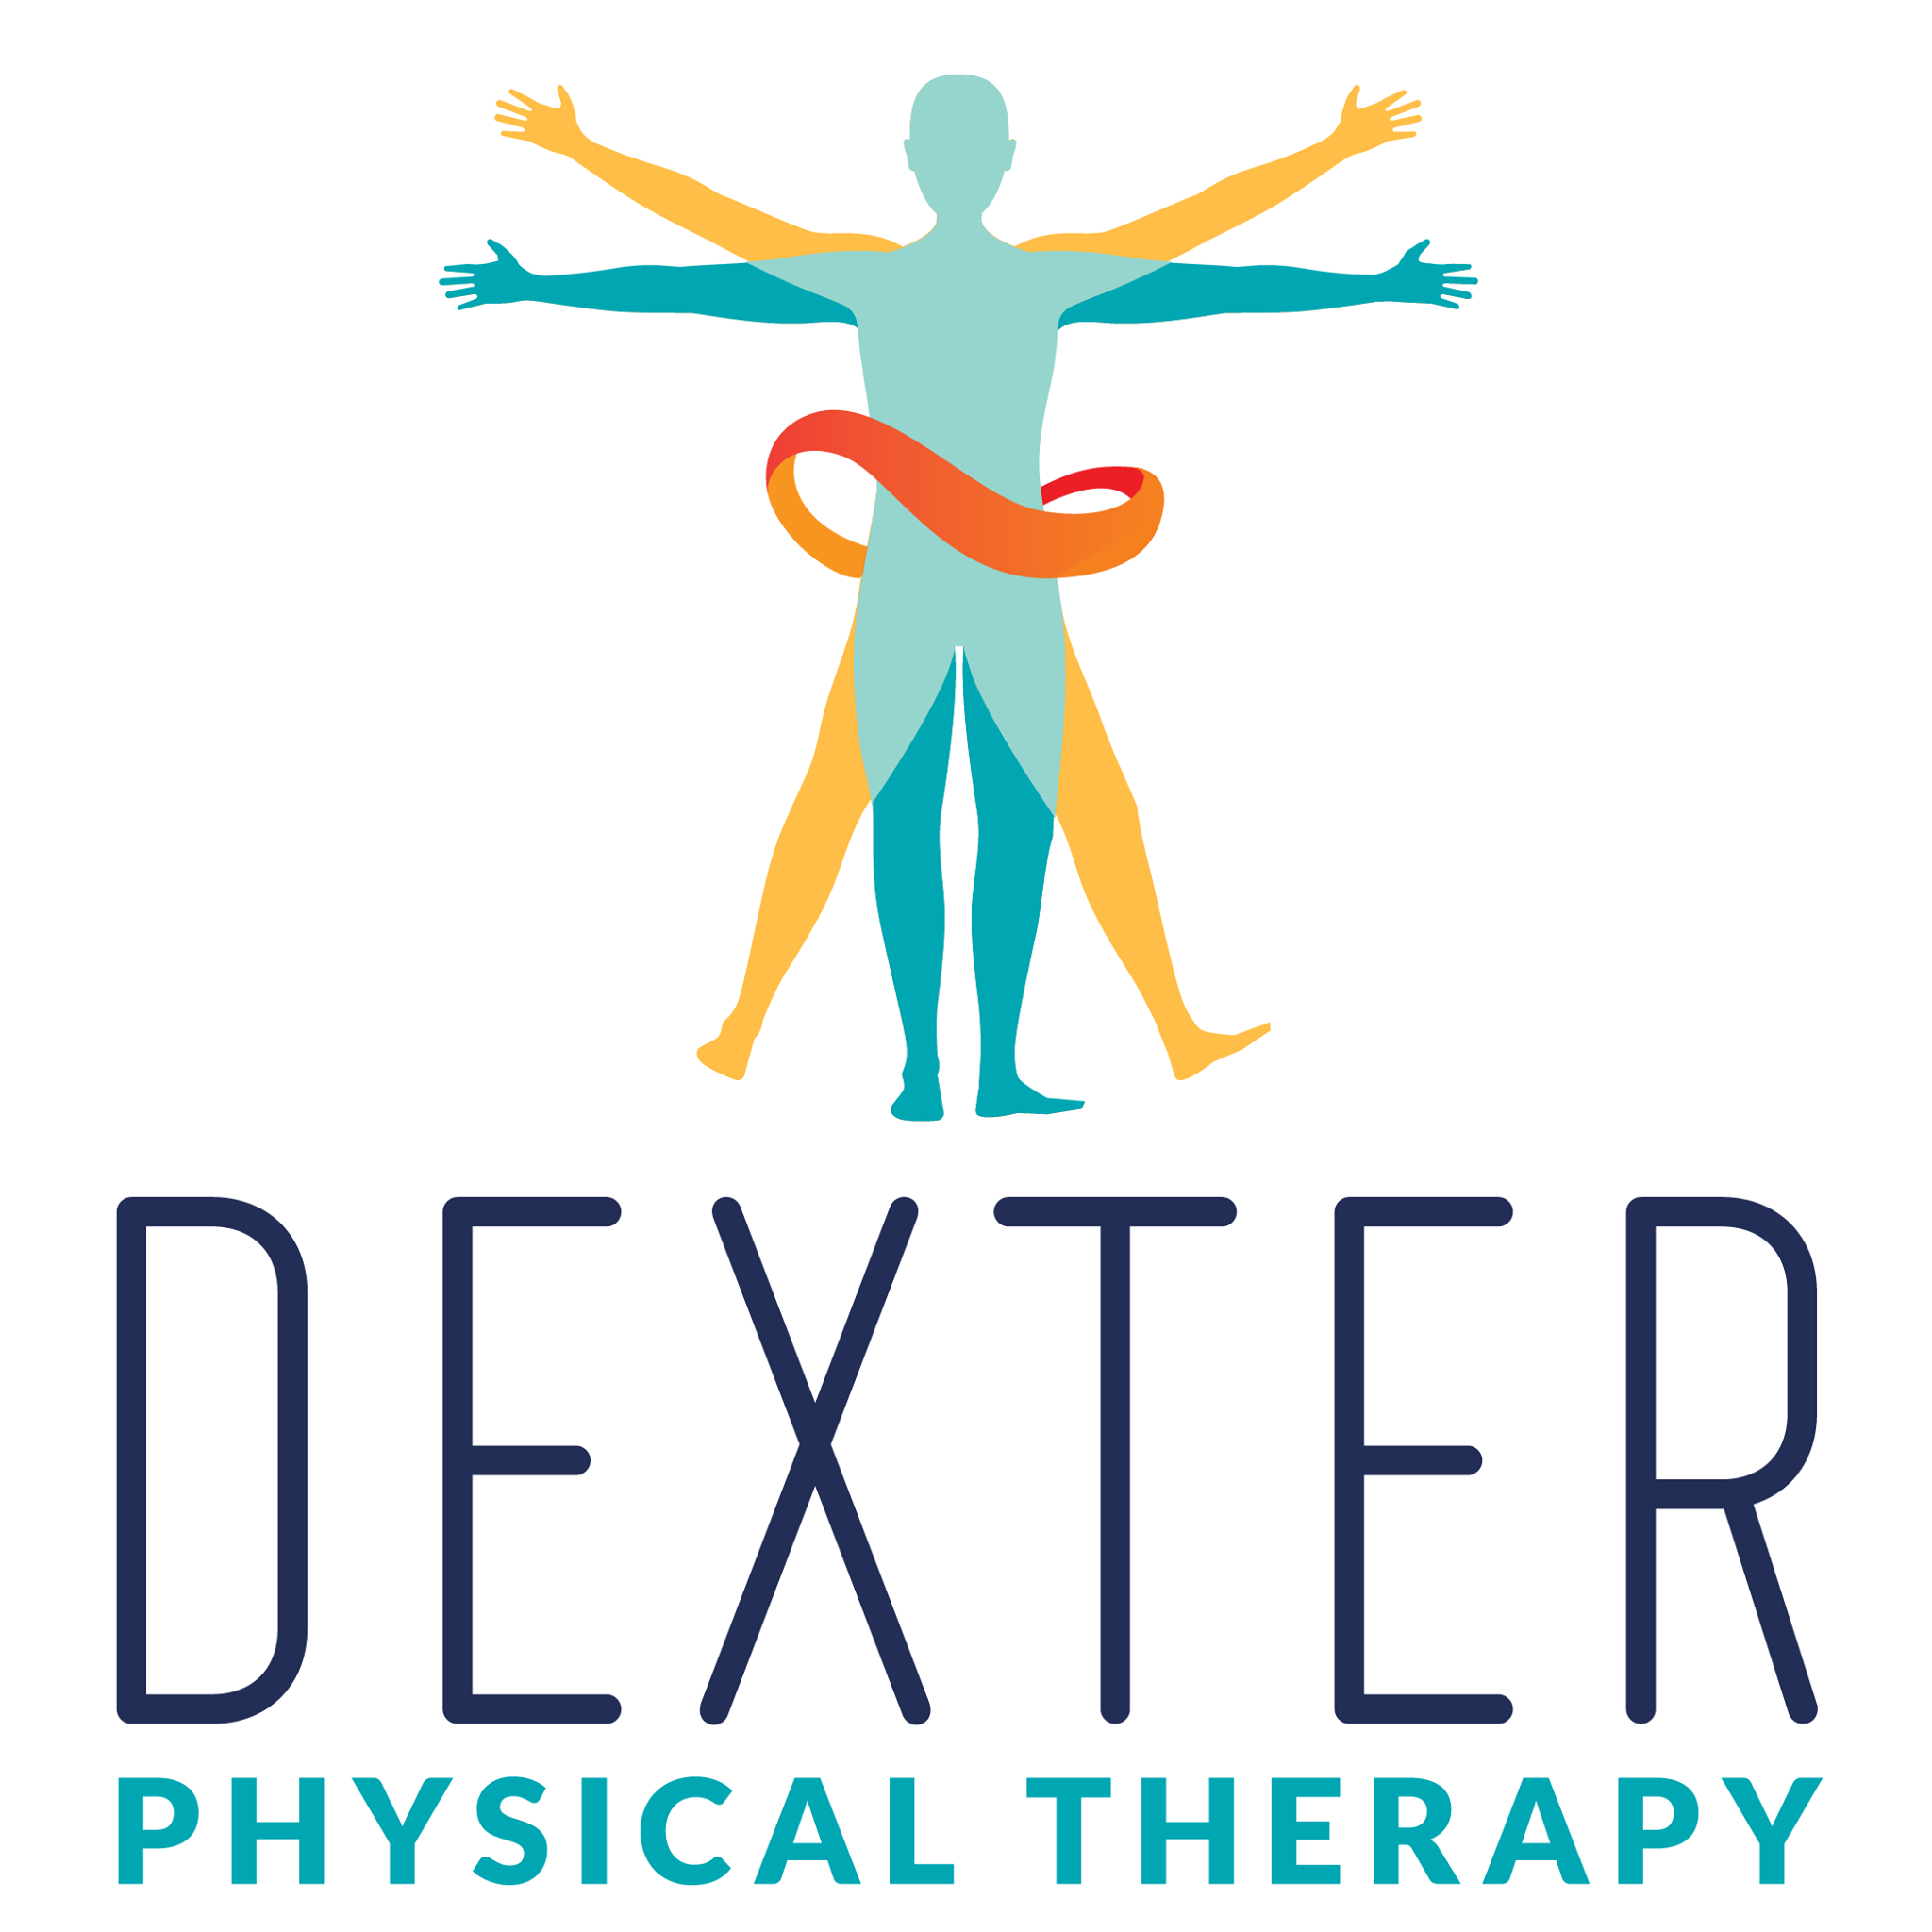 Dexter Physical Therapy